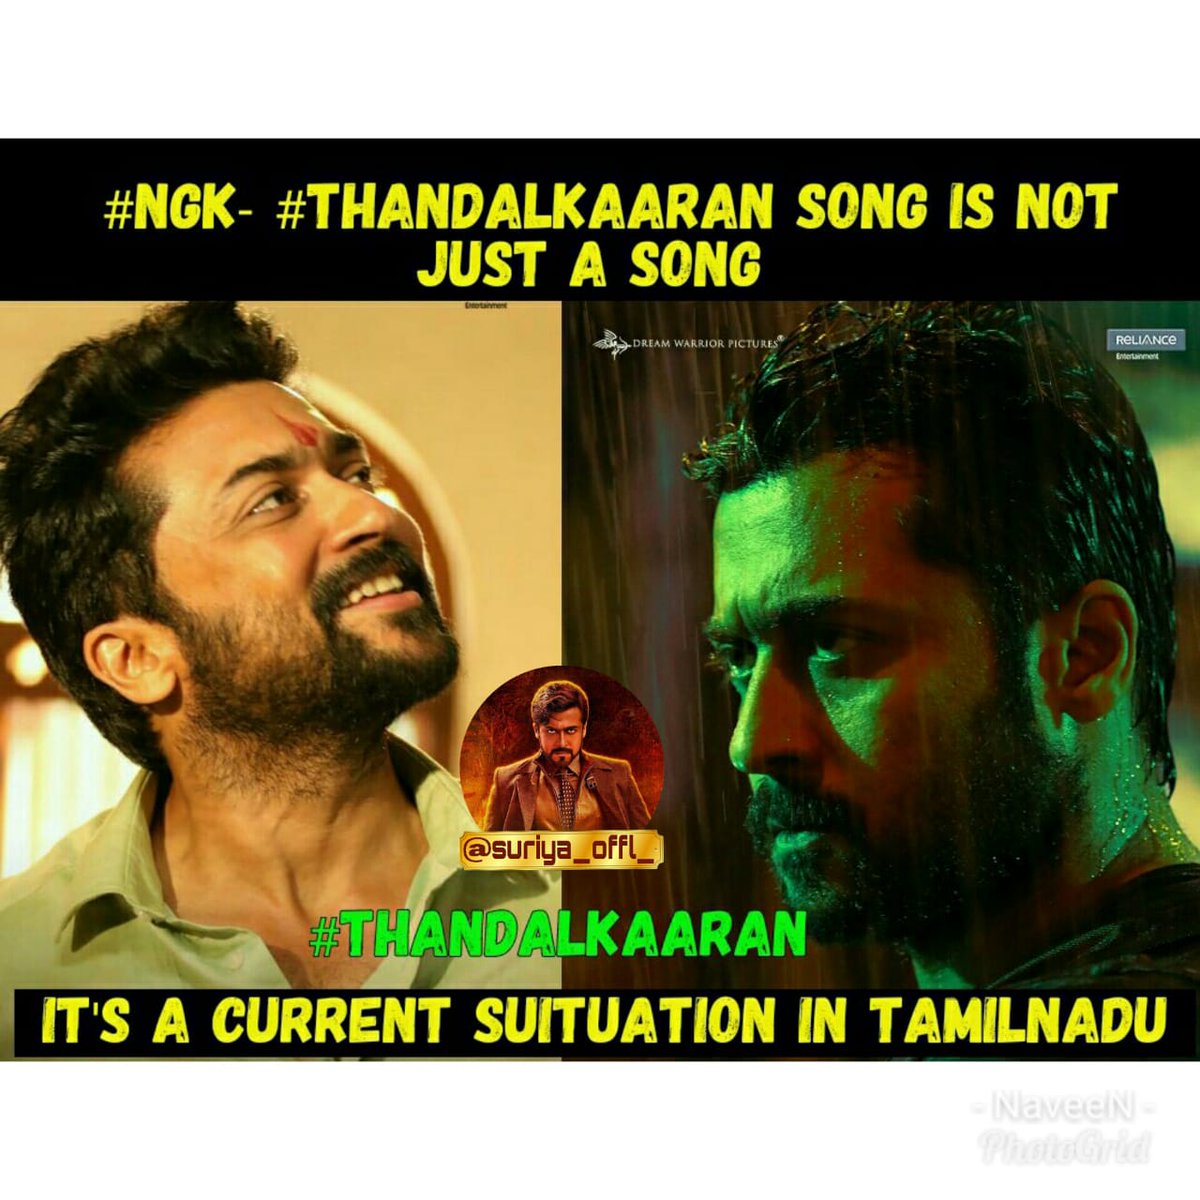 #Thandalkaaran Song Is Not Just Song😉

 It's A Current Situation In Tamilnadu 💥

#NGKSingle 

Song Link - bit.ly/Thandalkaaran